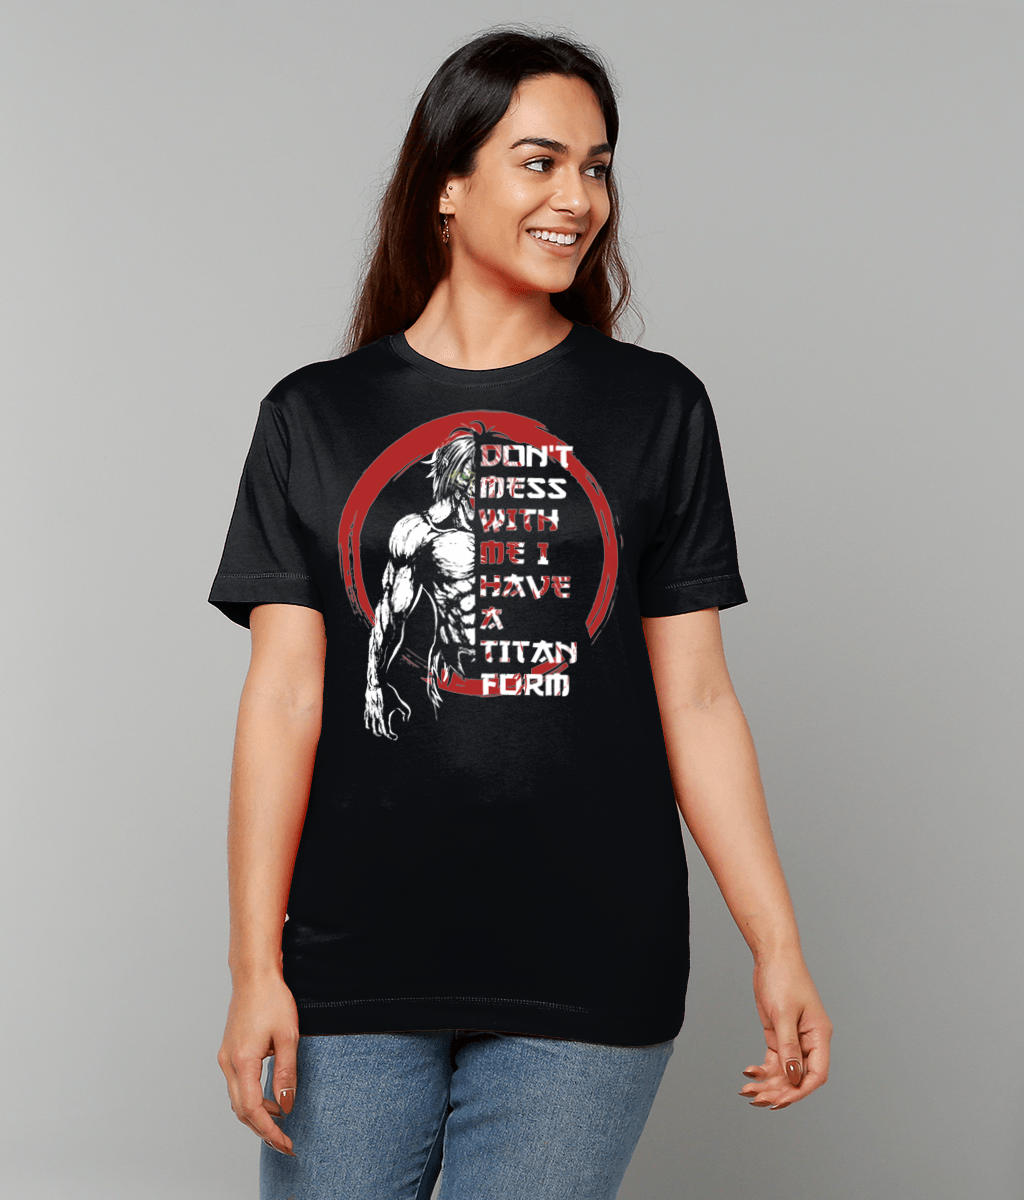 Don't mess with me i have a titan form, Unisex T-Shirt